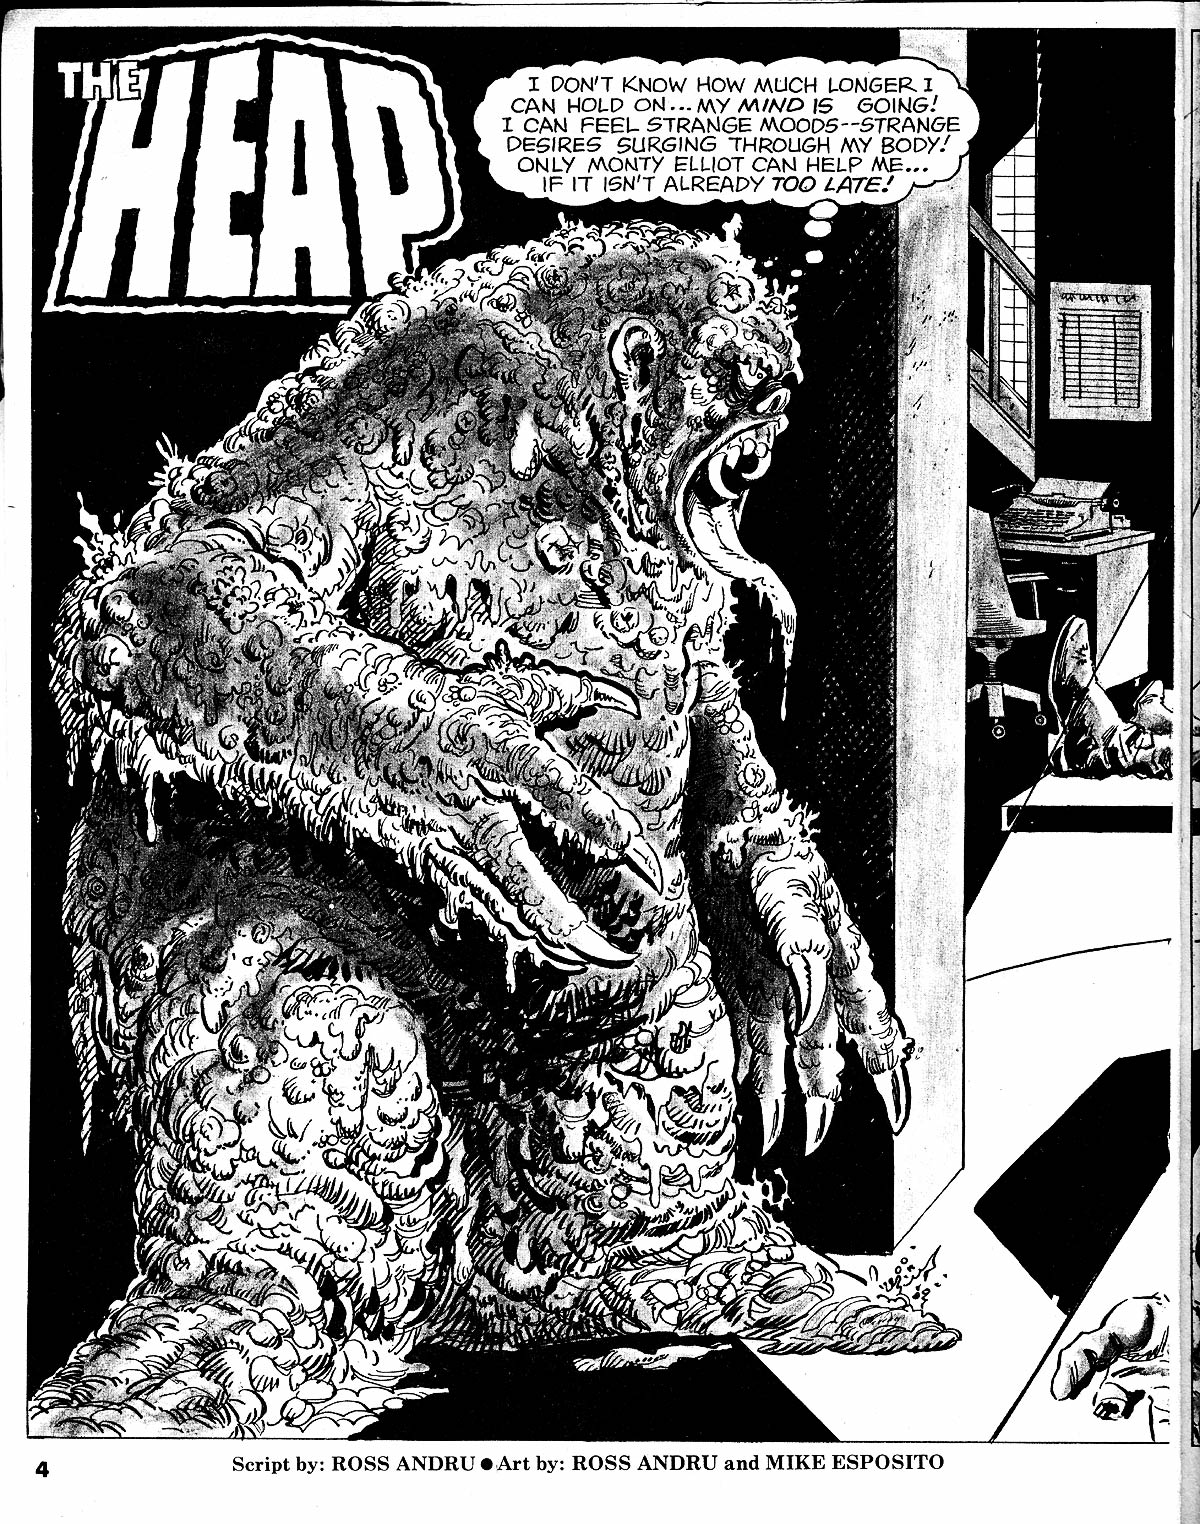 Skywald's Heap, illustrated by Ross Andru